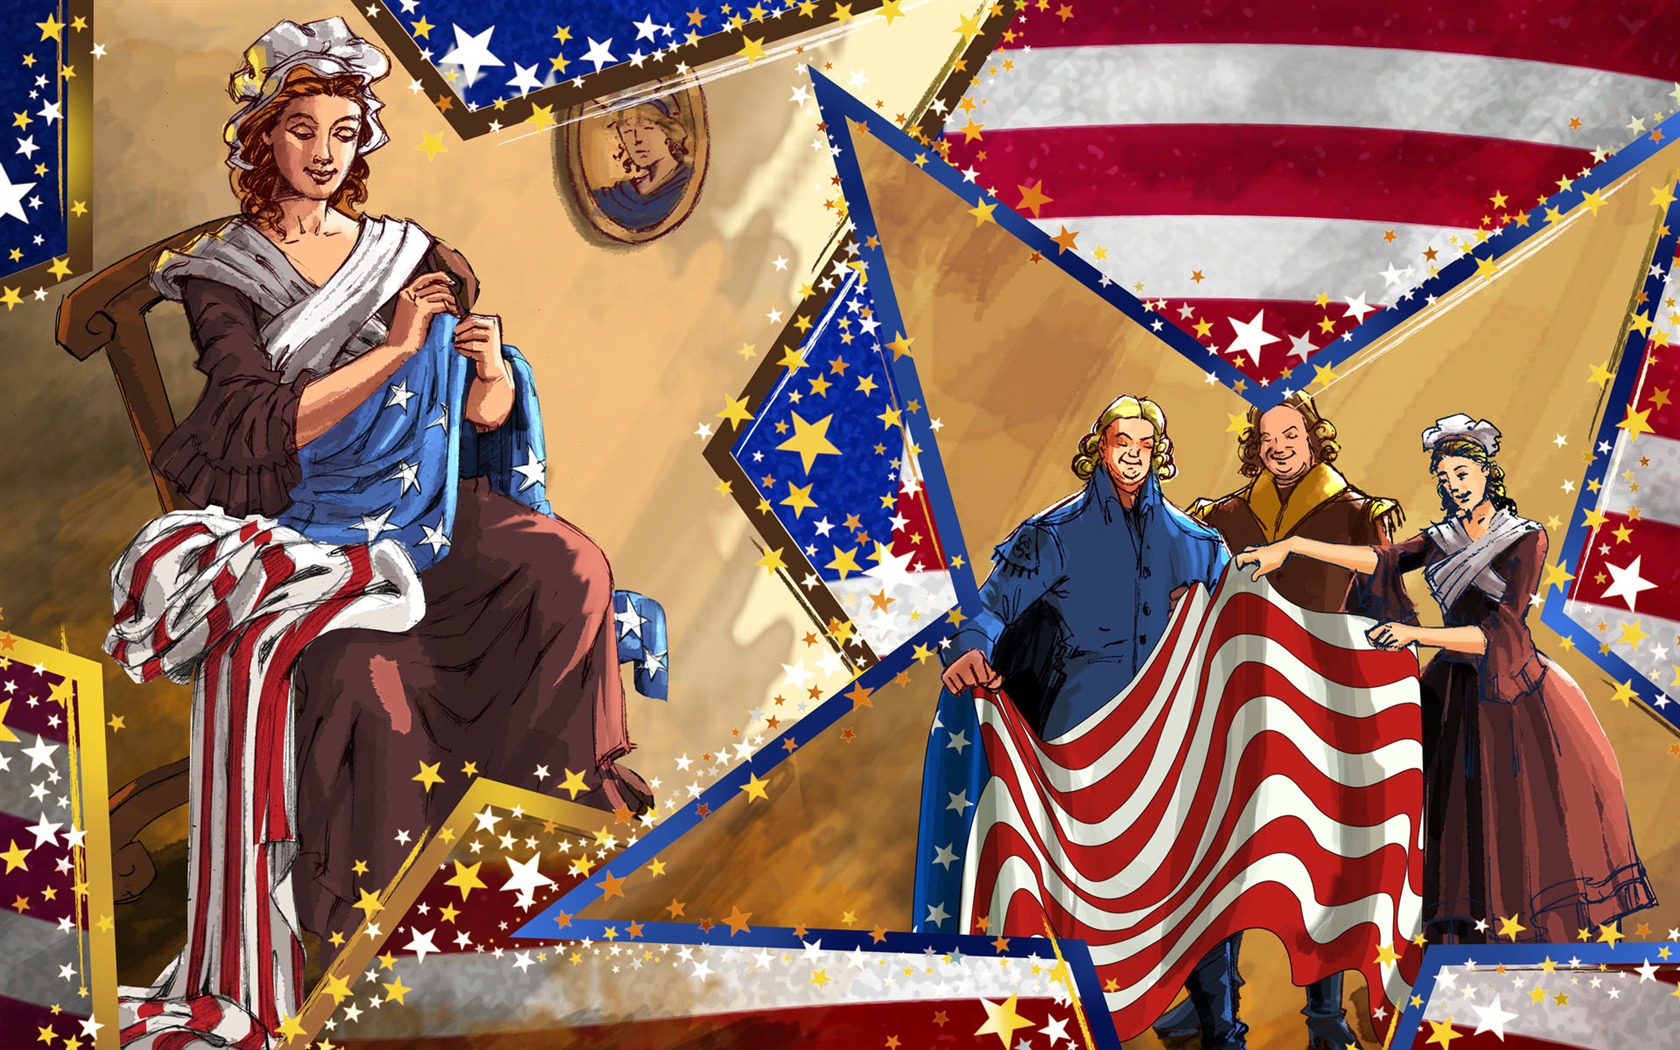 U.S. Independence Day theme wallpaper #10 - 1680x1050